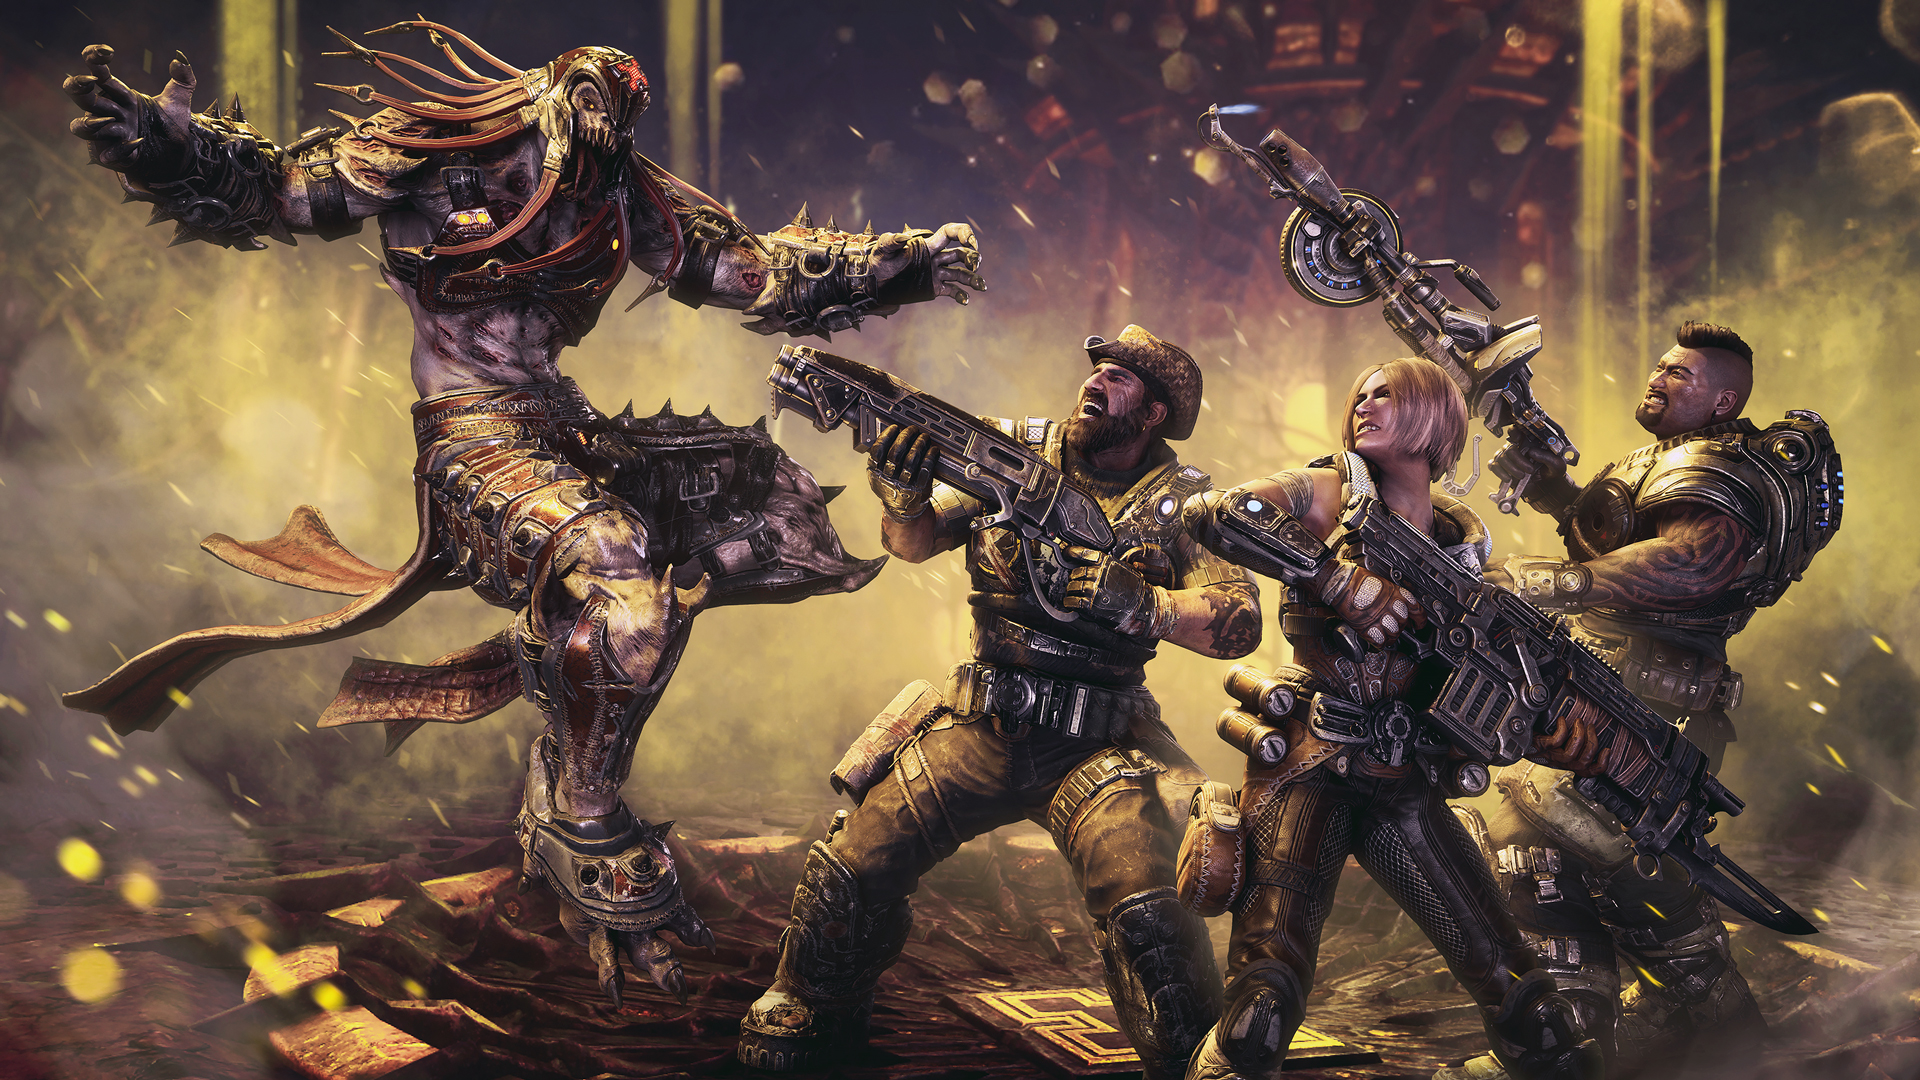 Gears 5 – Operation 3: Gridiron Available Today for All Players - Xbox Wire